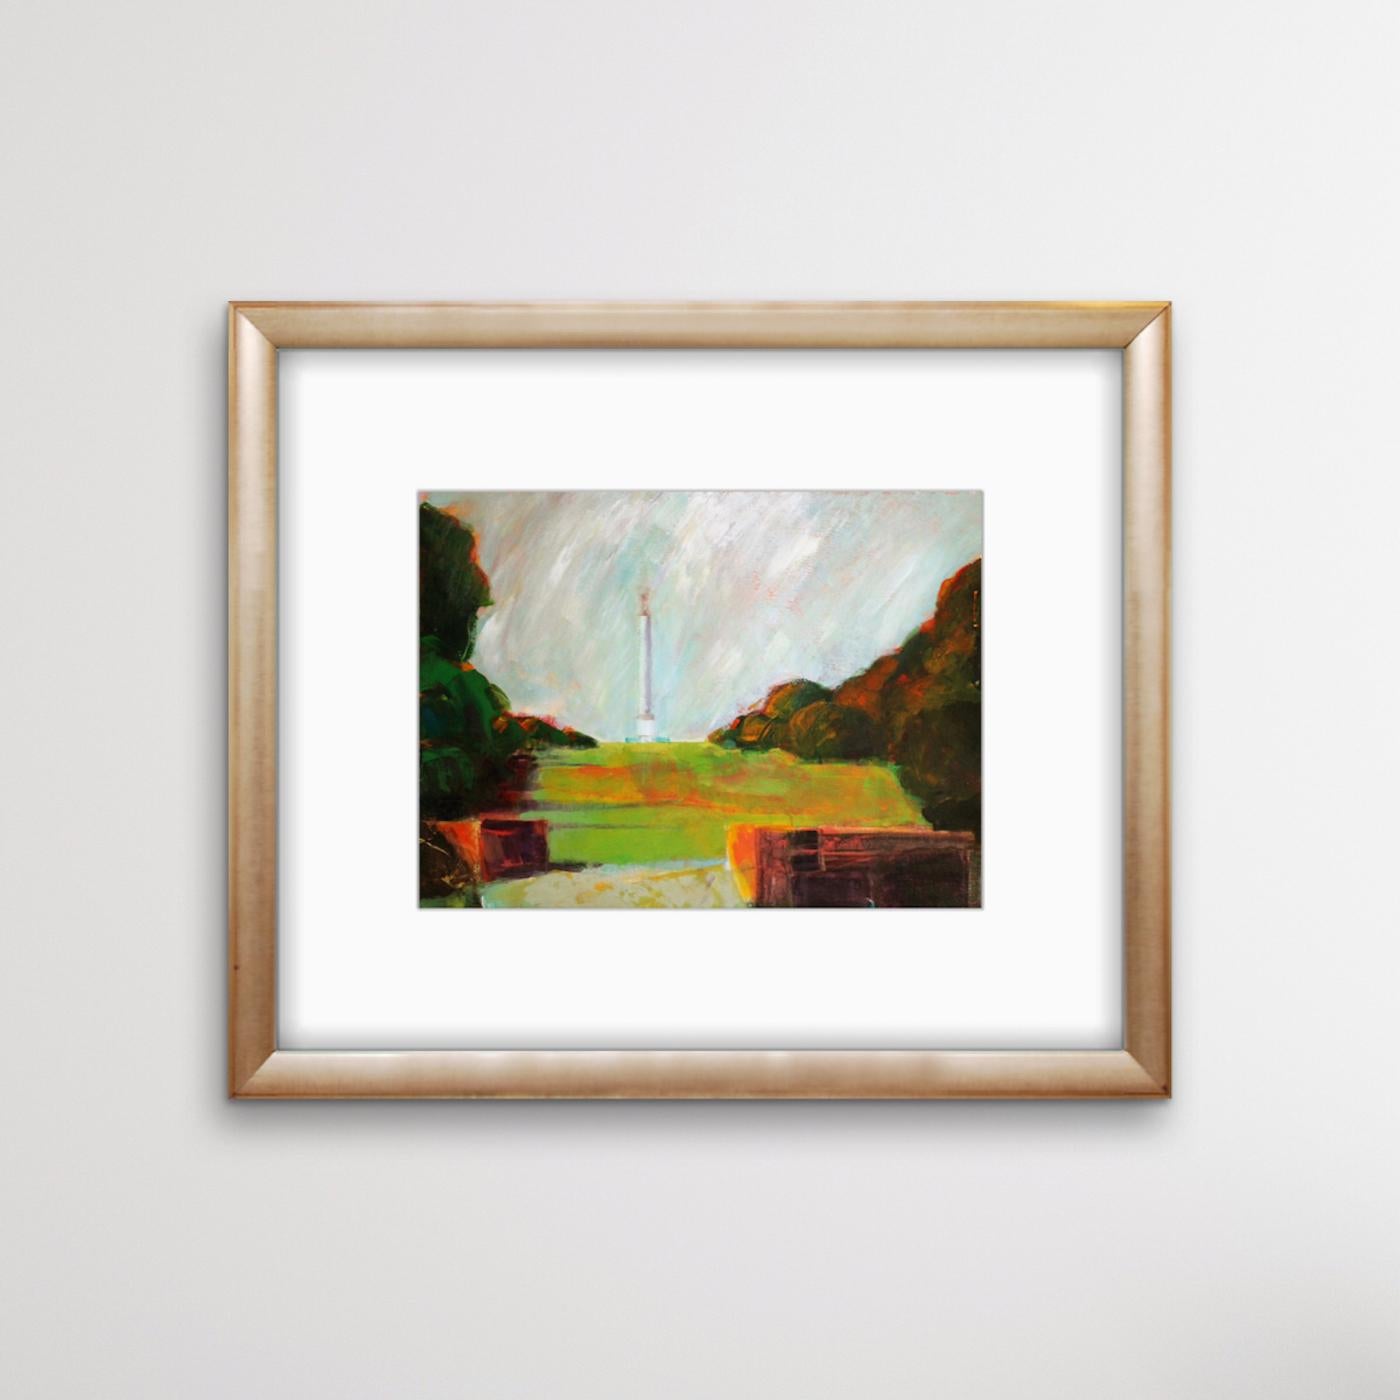 Blenheim - View to the Monument by Jon Rowland, Original painting, Art on Paper - Abstract Painting by Jon Rowland 